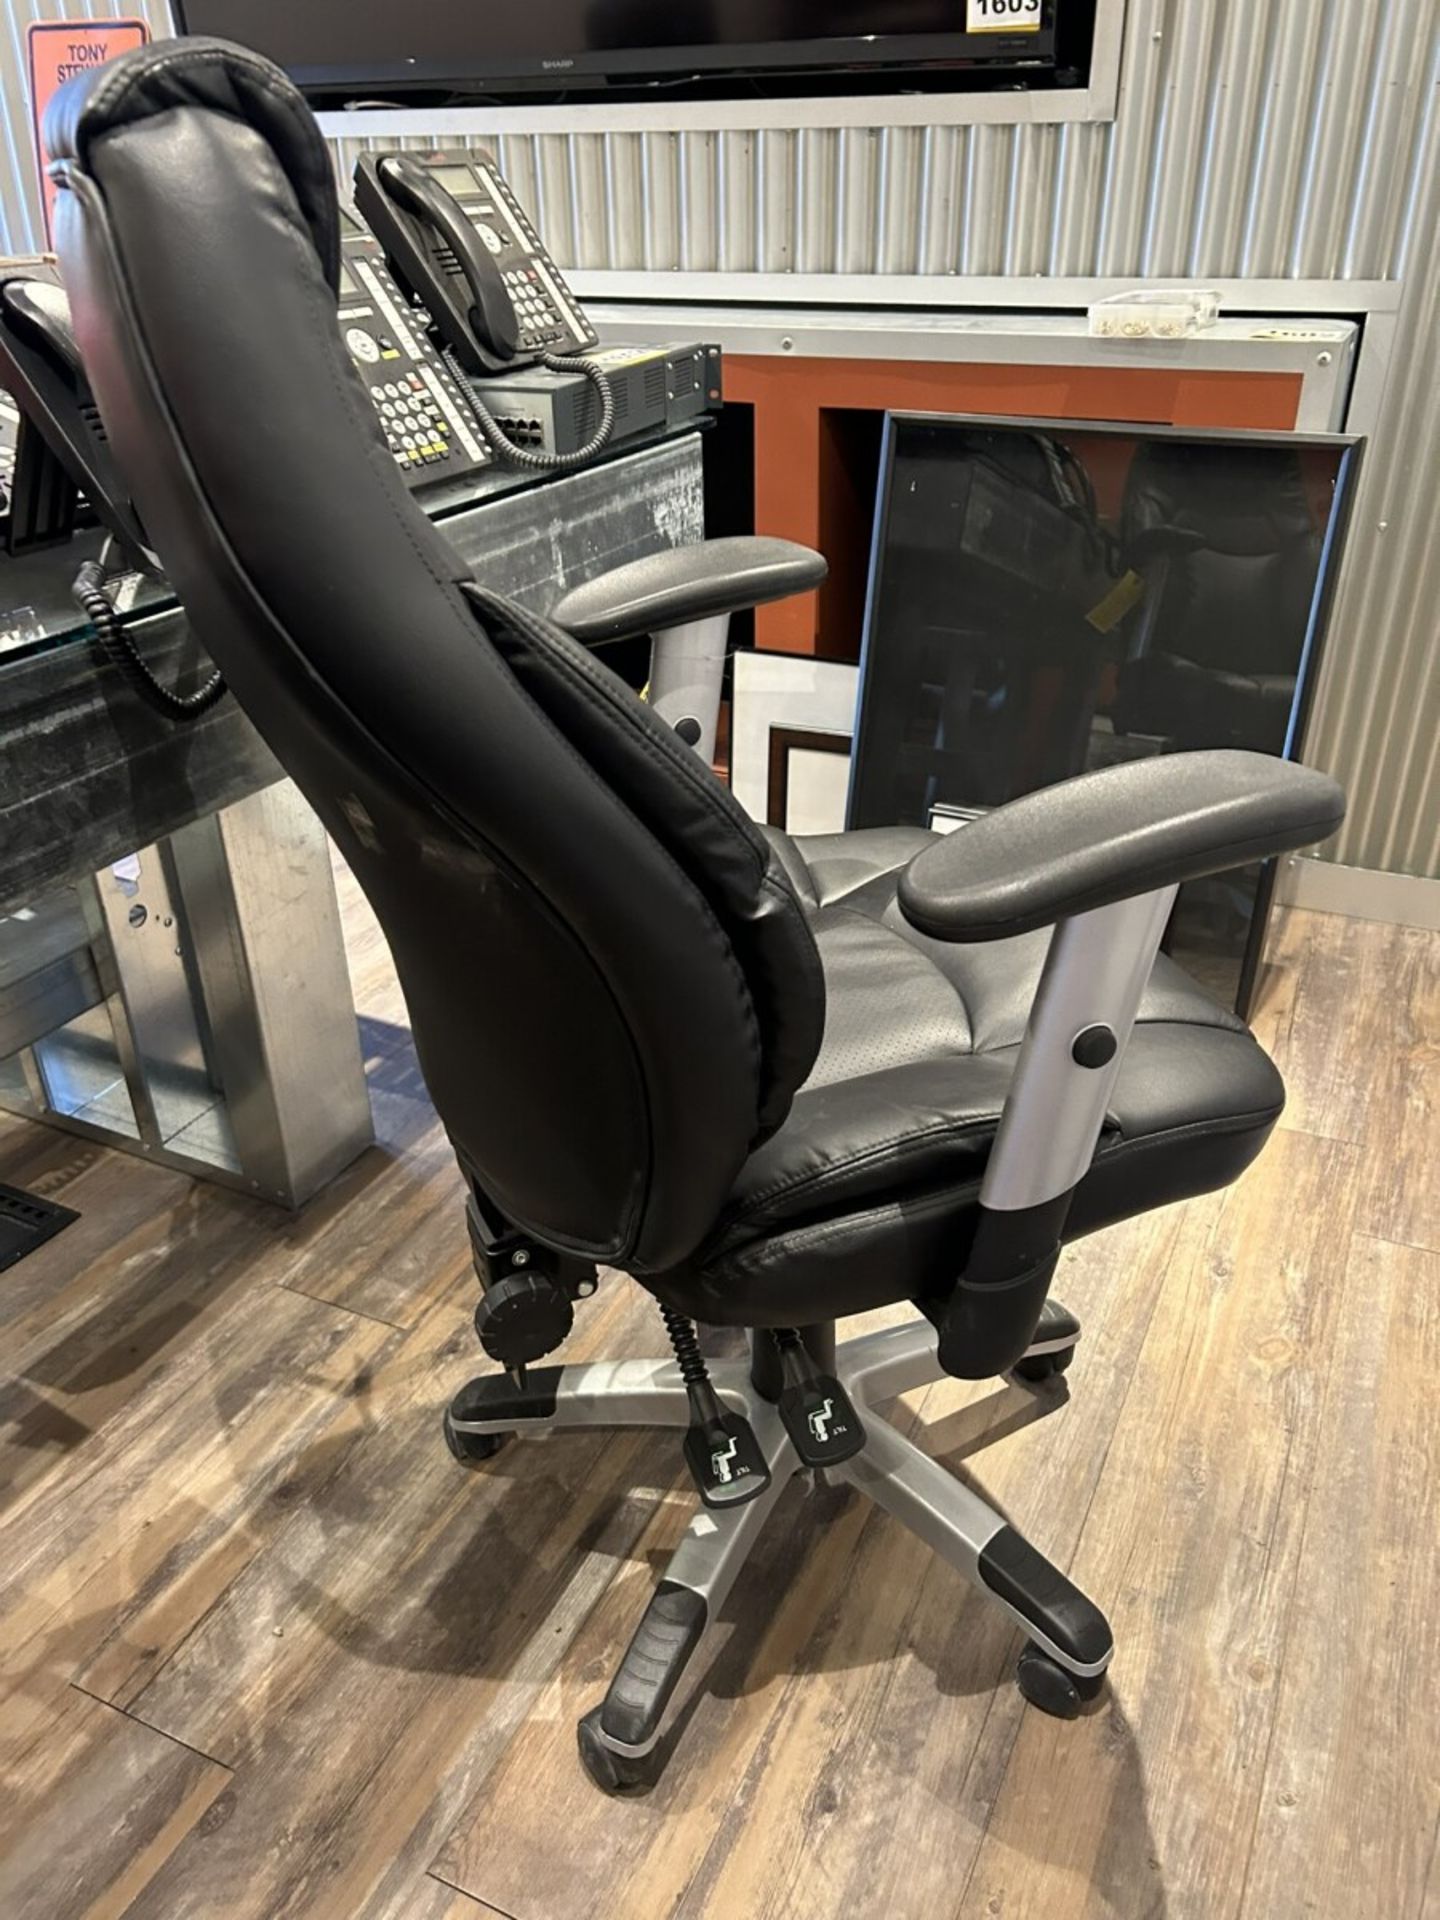 ADJUSTABLE ROLLING OFFICE CHAIR - Image 3 of 4